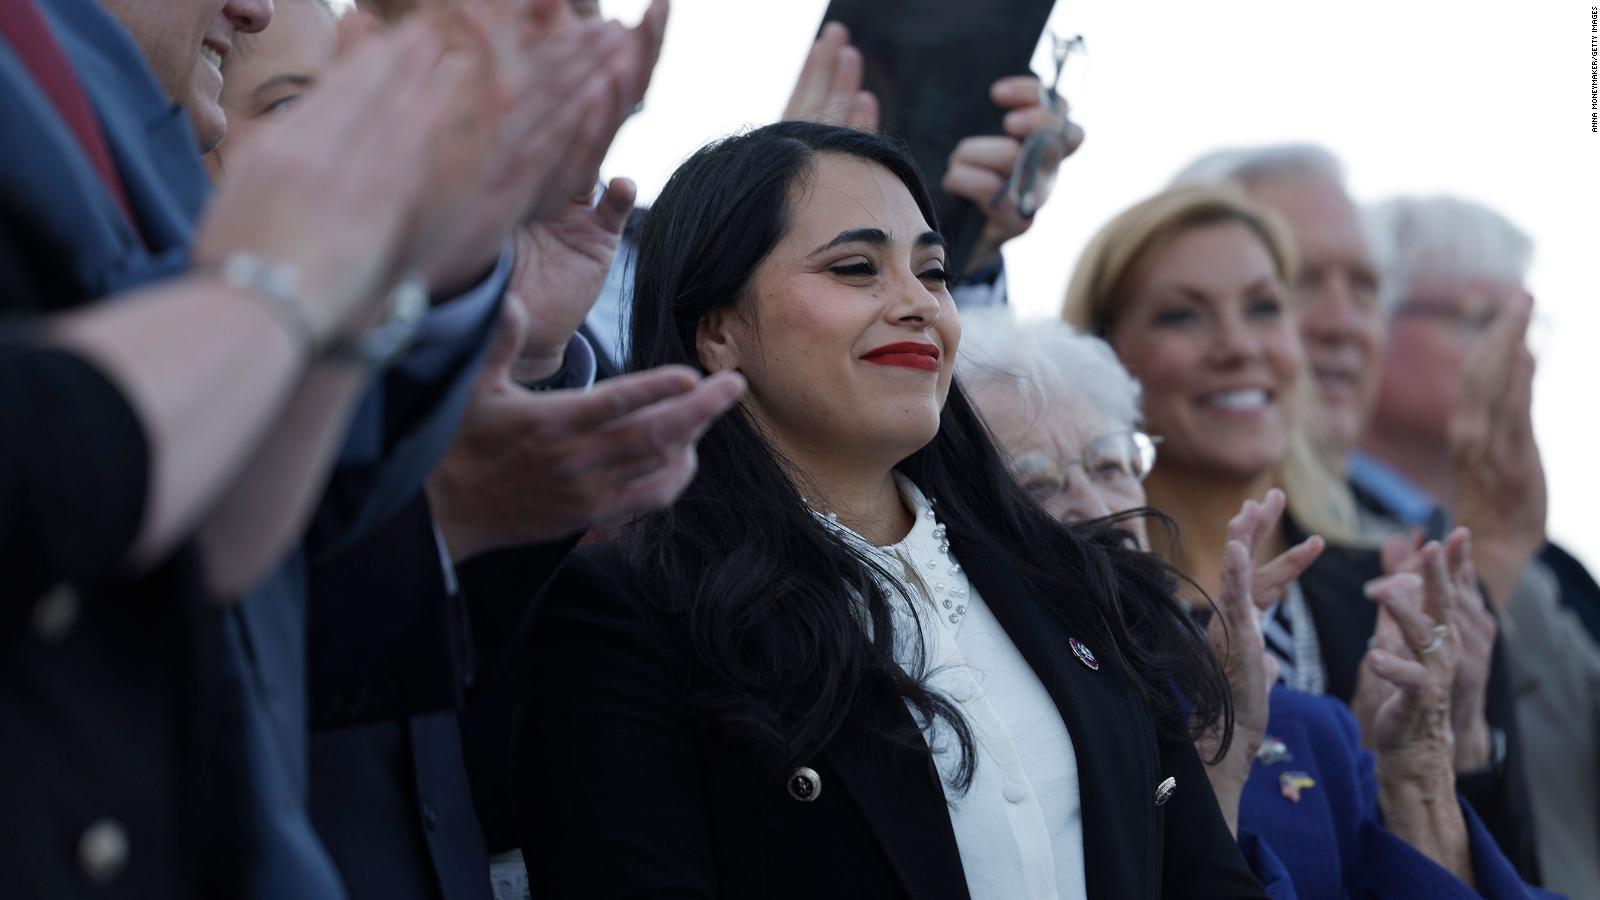 Mayra Flores becomes the first woman born in Mexico to take the oath of office in the US Congress.